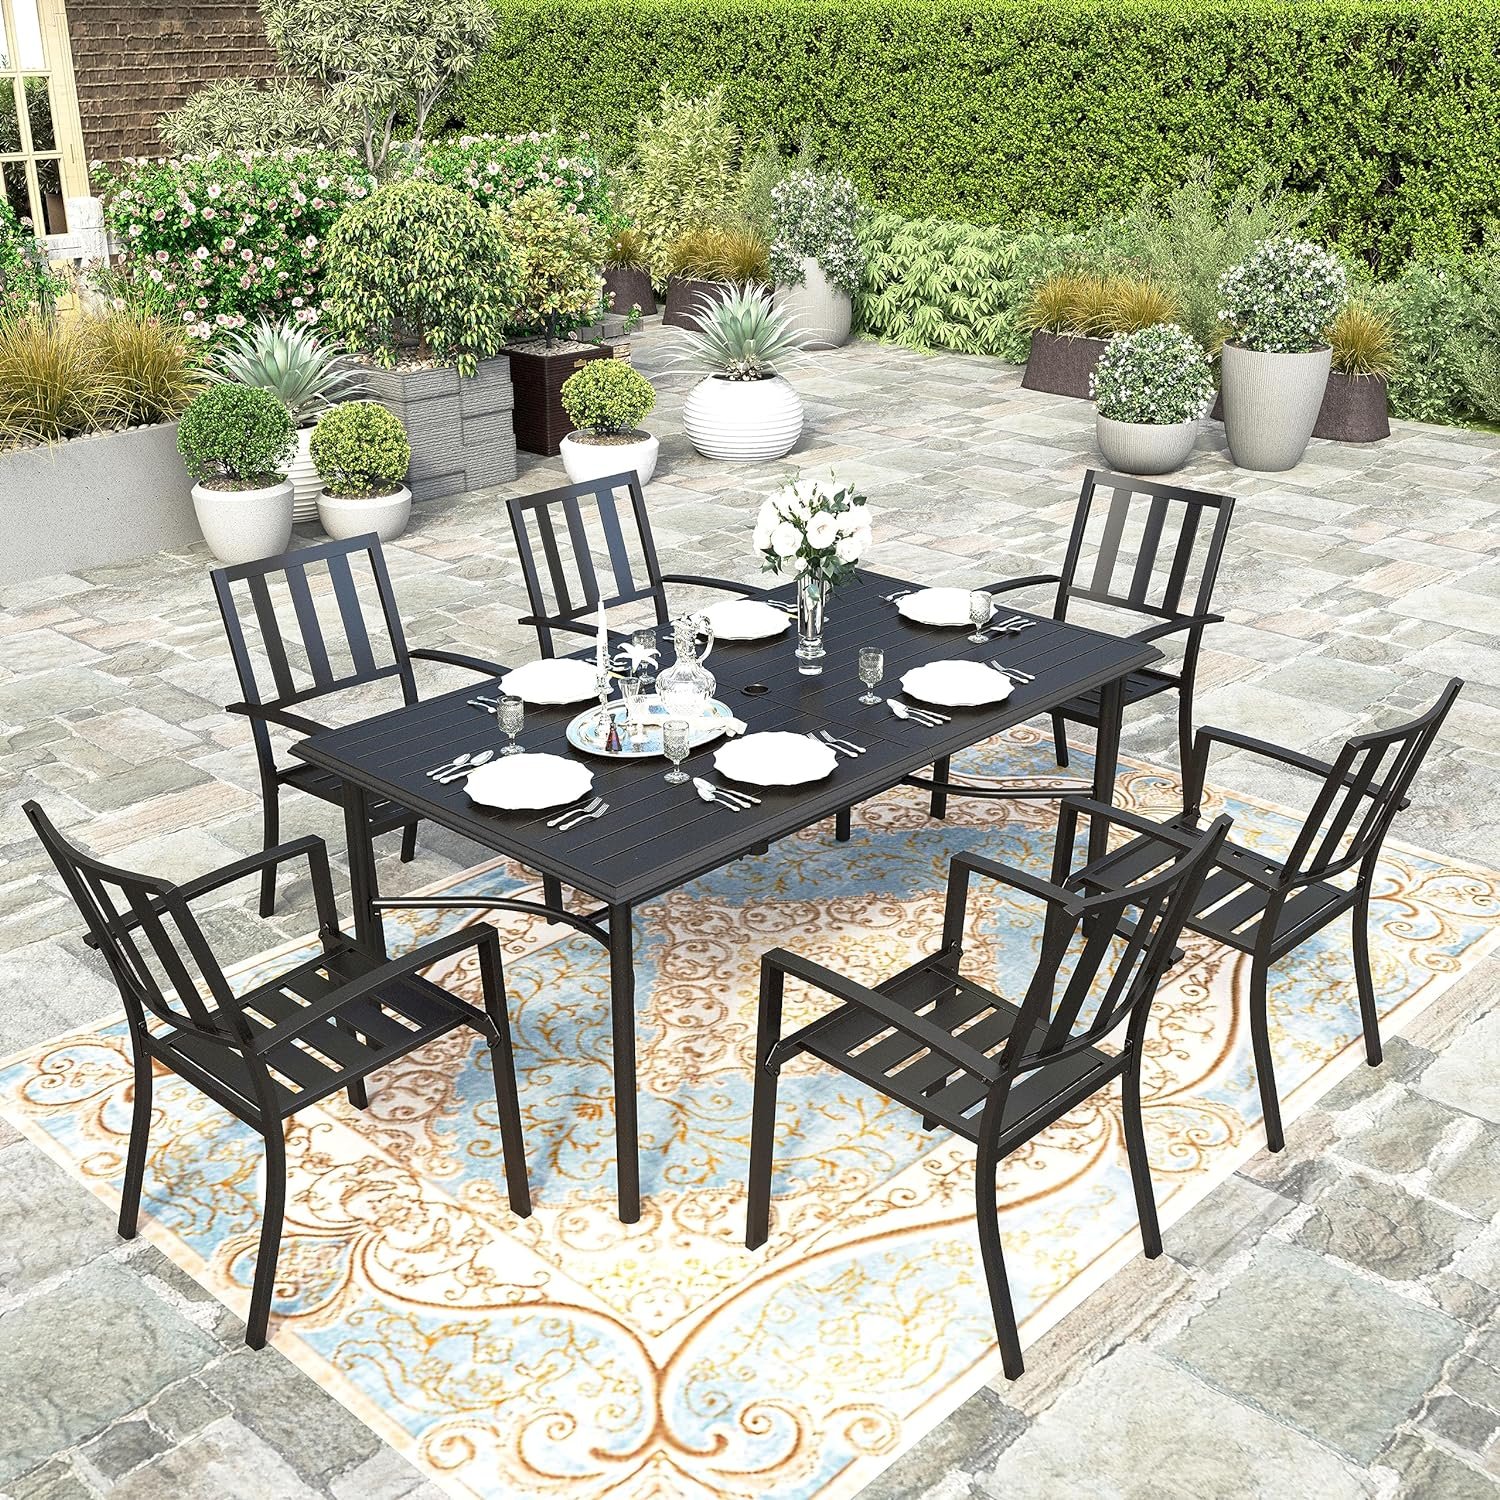 HERA'S HOUSE 7 Piece Patio Dining Set, 67" Rectangular Patio Table with 1.57" Umbrella Hole and 6 Metal Patio Chairs, Outdoor Table and Chairs for Lawn Garden Backyard Porch